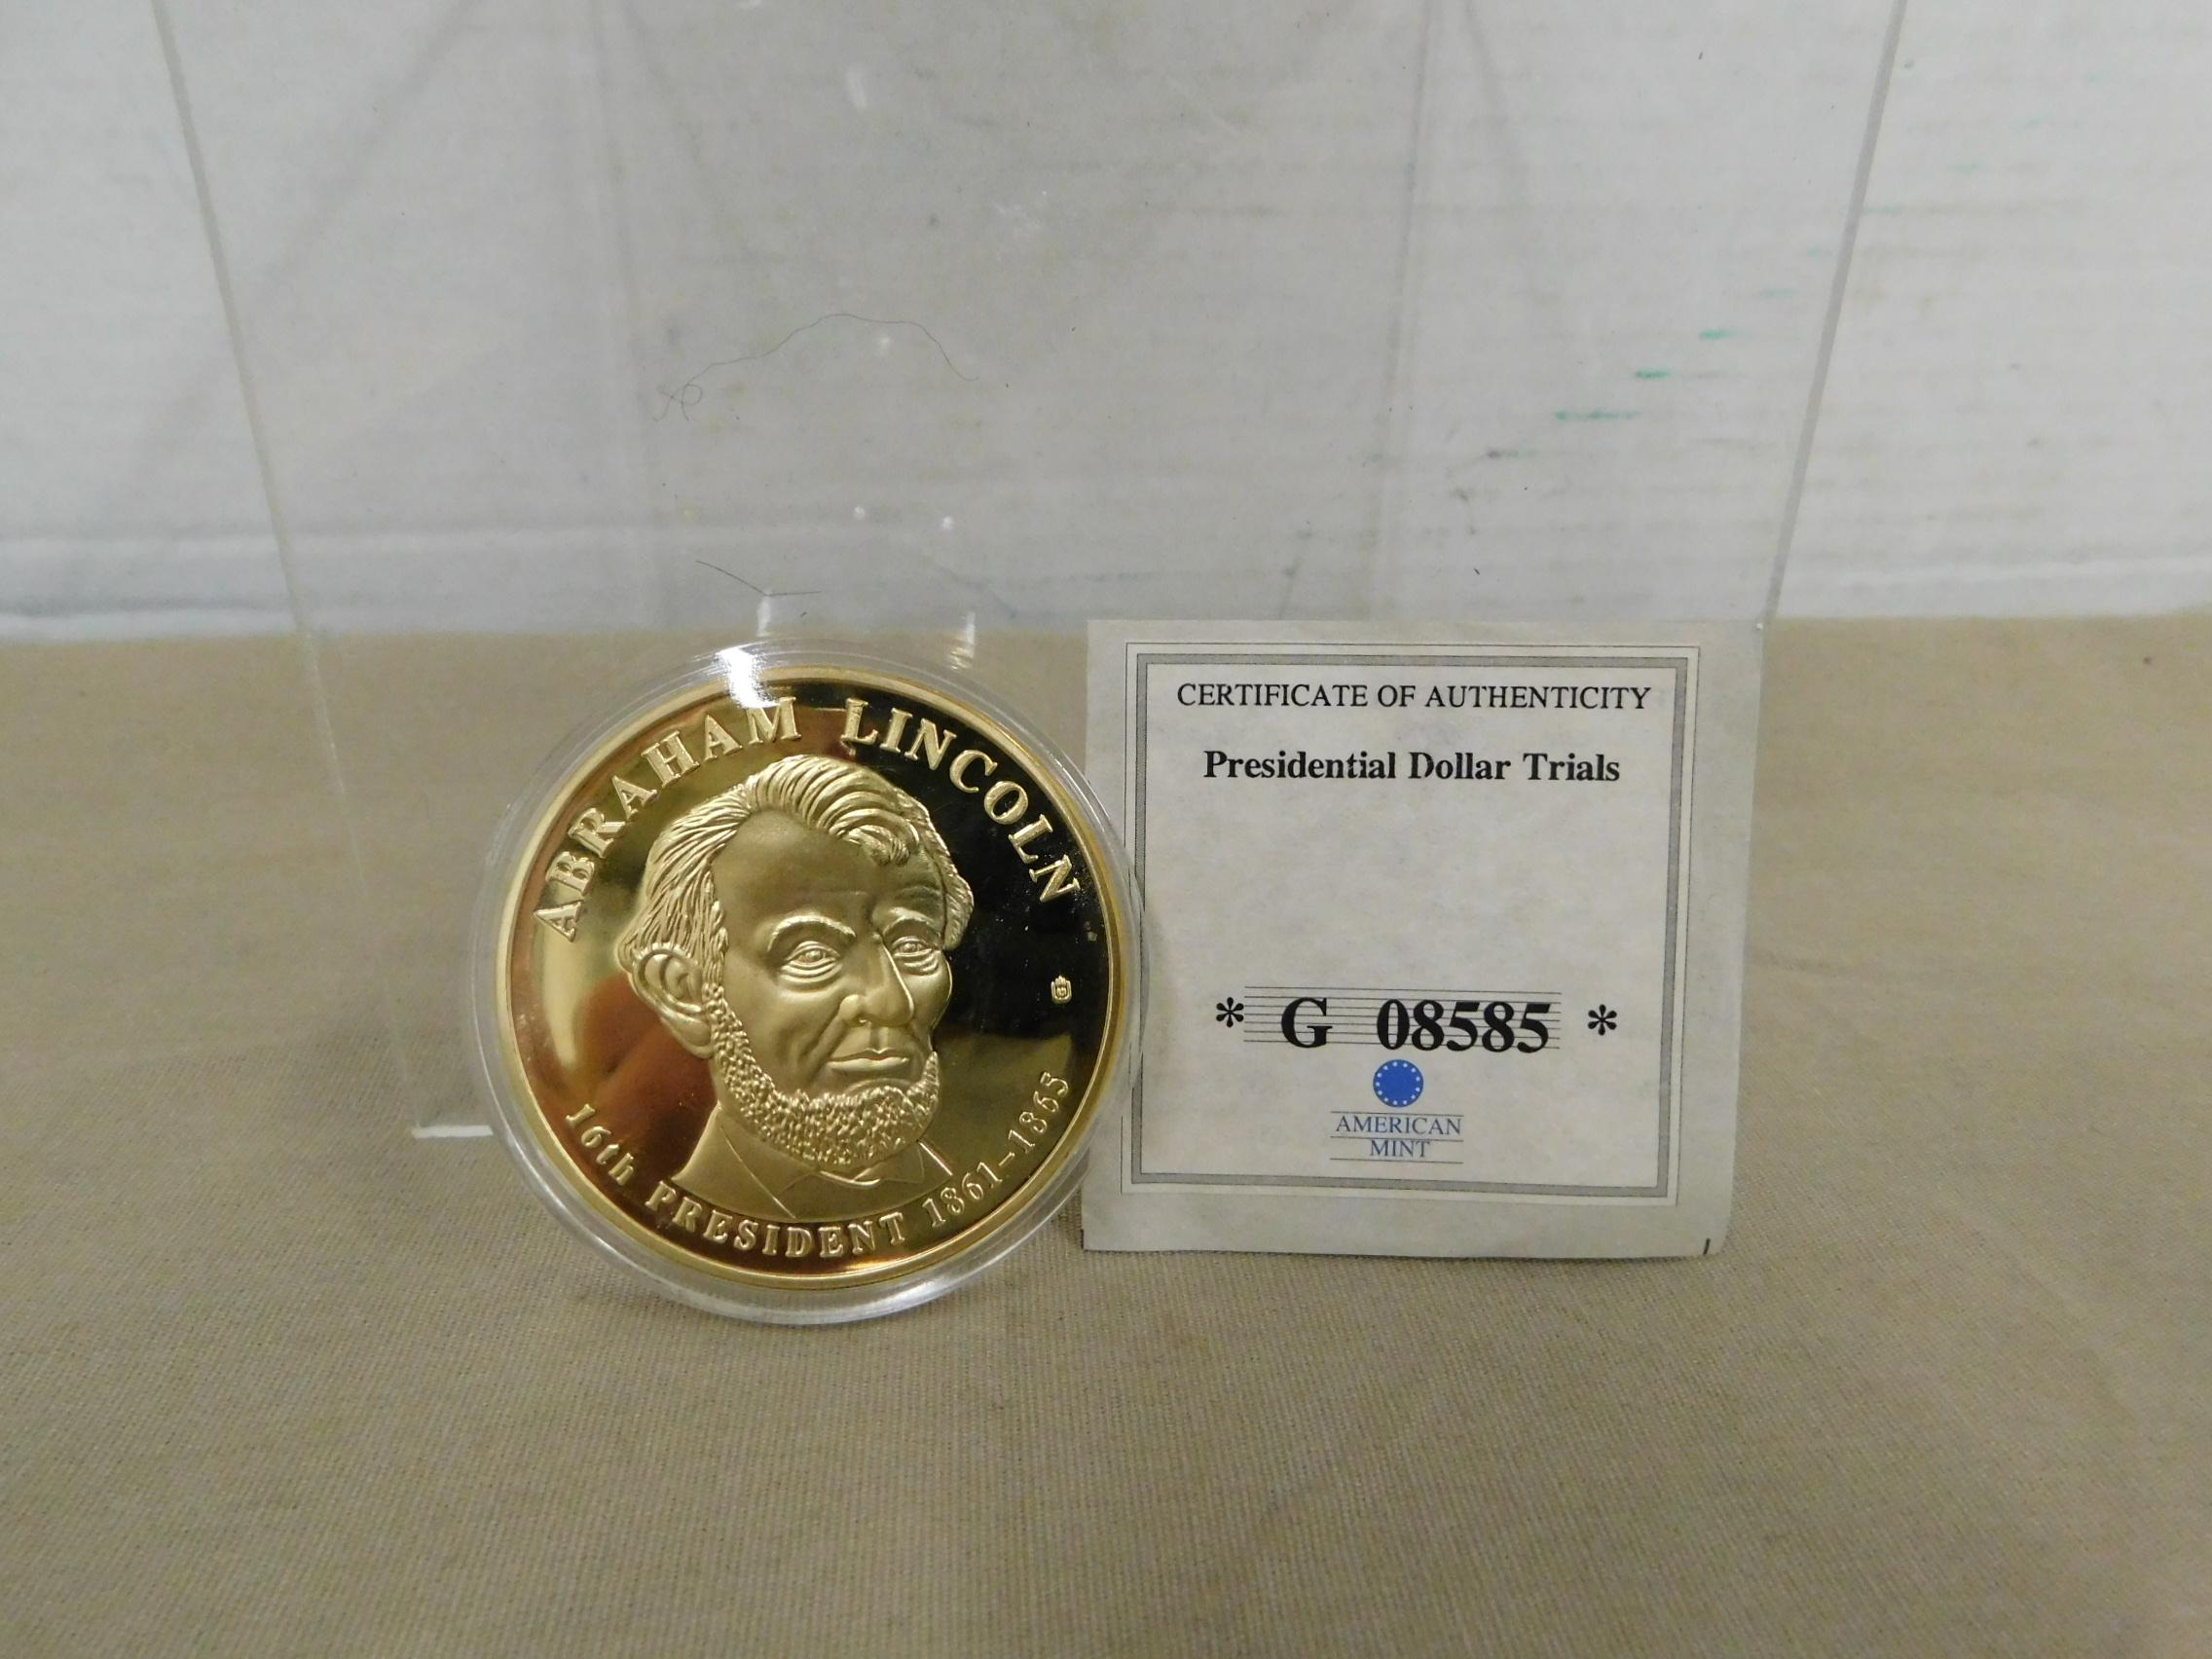 ABRAHAM LINCOLN PRESIDENTIAL DOLLAR TRIALS COIN - PROOF